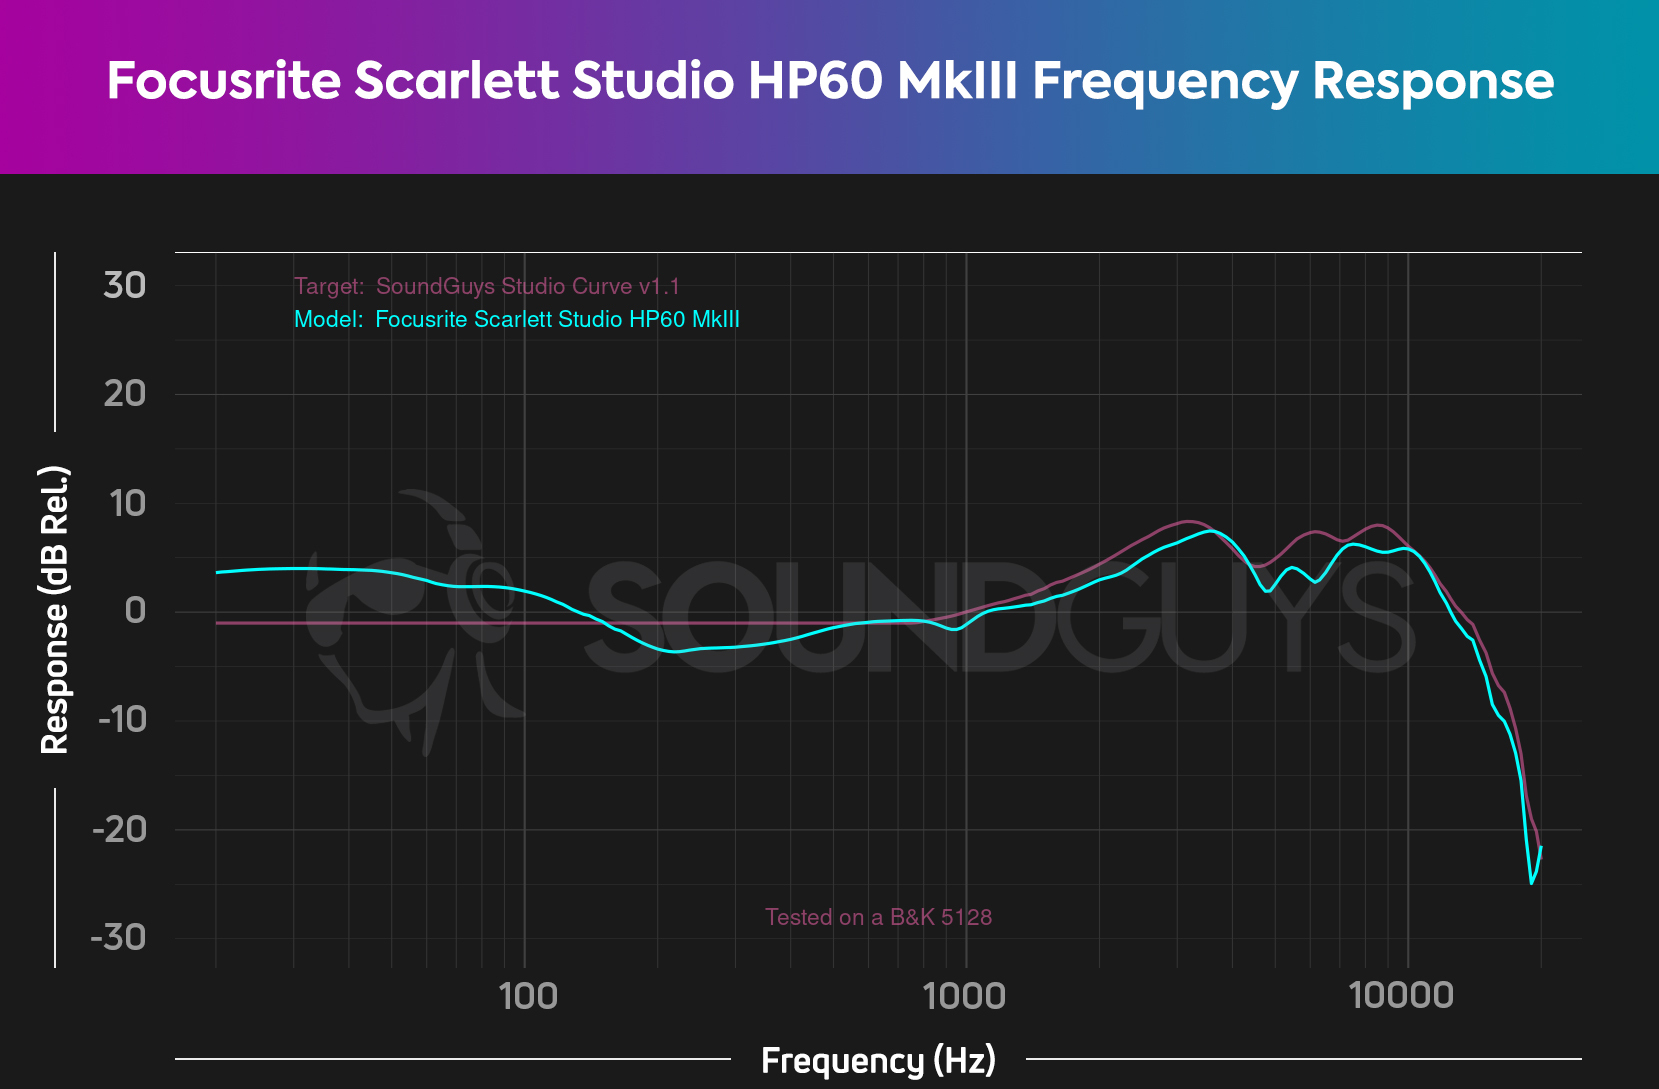 A chart showing the Focusrite Scarlett 2i2 Studio HP60 MkIII close adherence to the SoundGuys studio curve, but with extra volume in the bass frequencies.